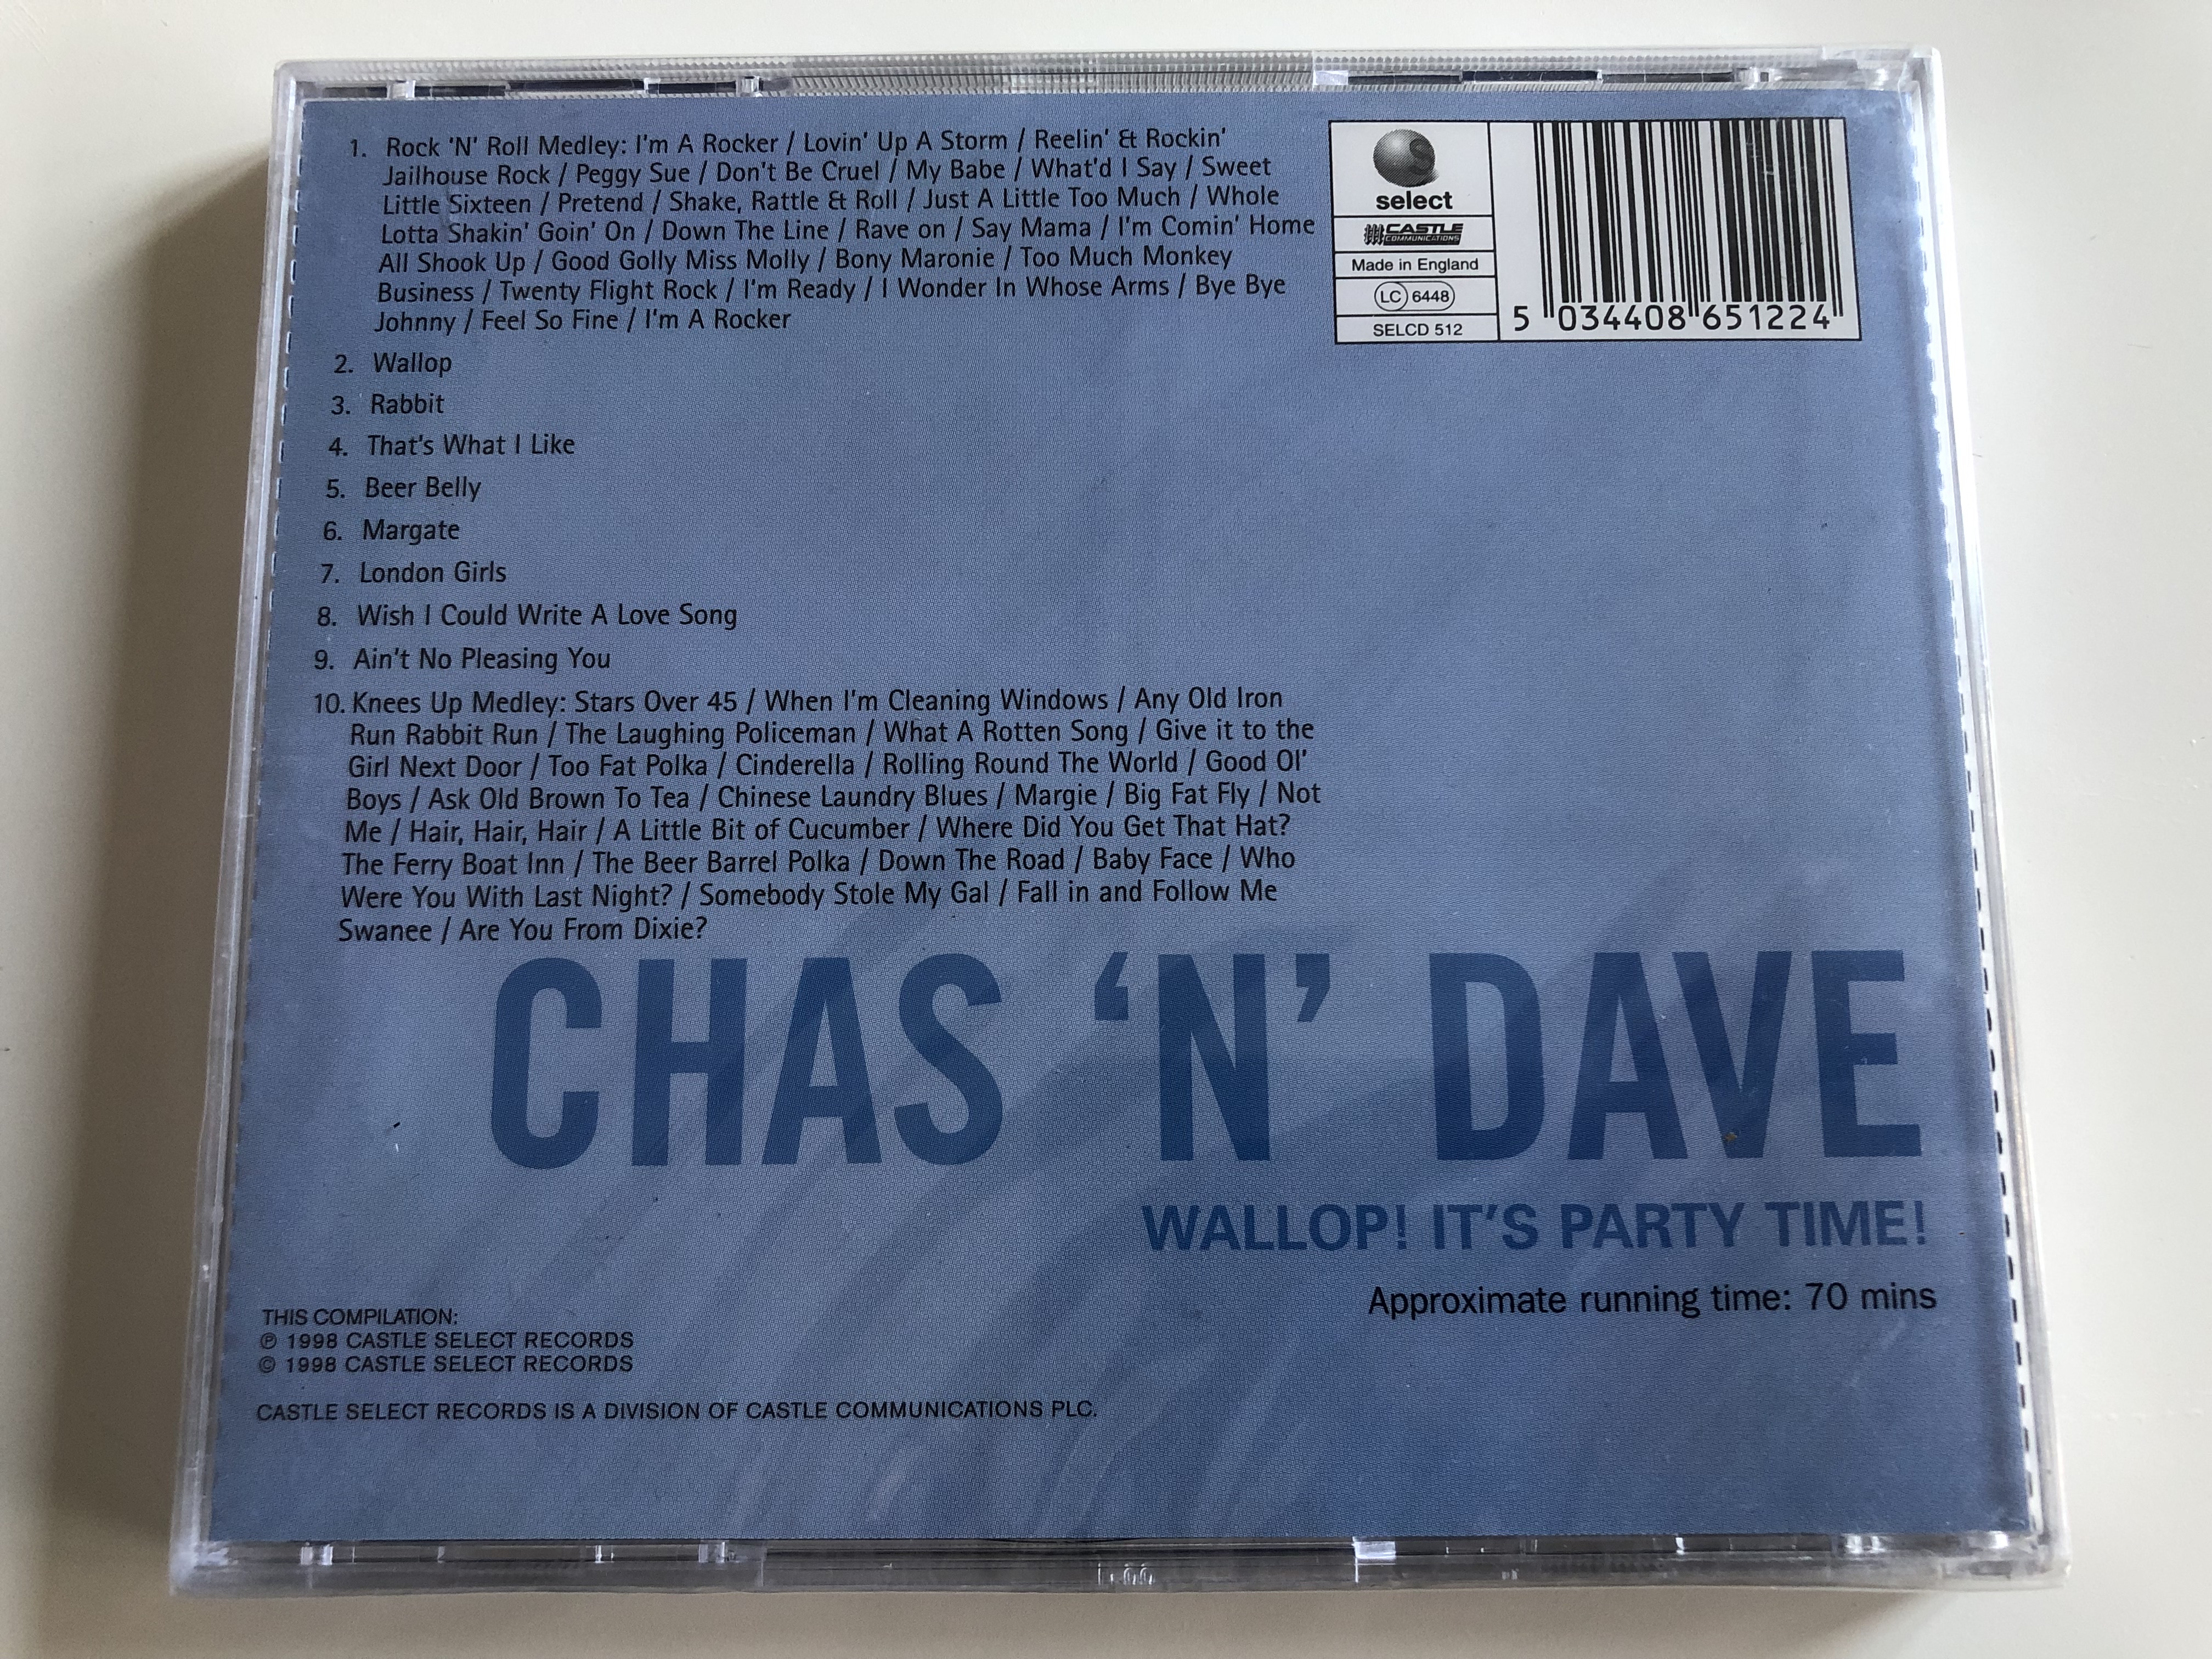 chas-n-dave-wallop-it-s-party-time-audio-cd-1998-selcd-512-2-.jpg